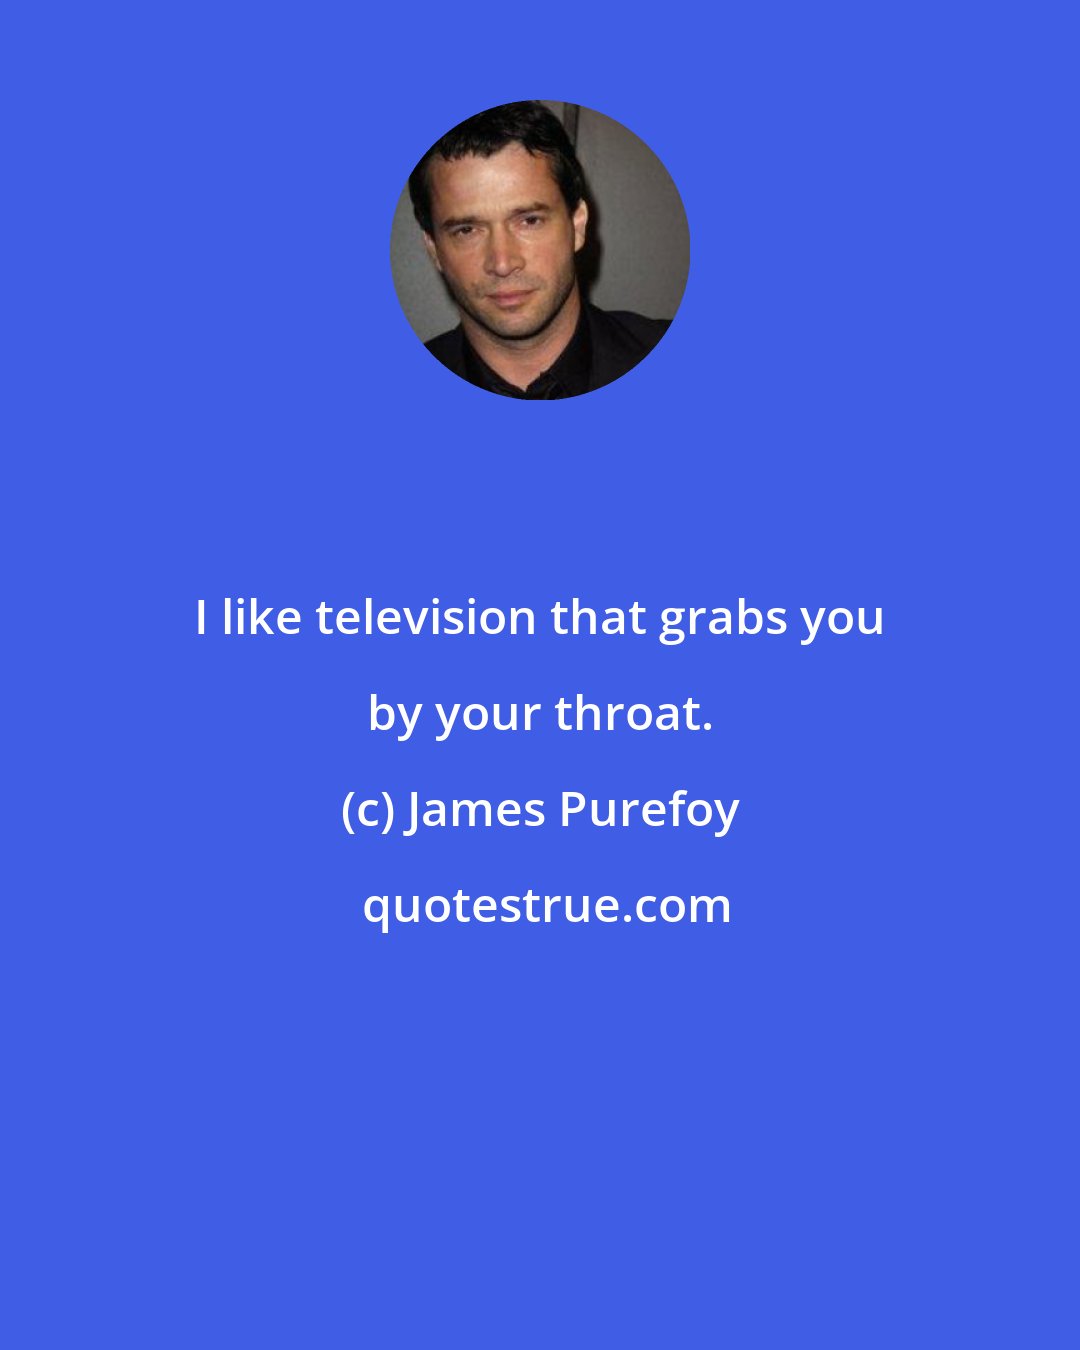 James Purefoy: I like television that grabs you by your throat.